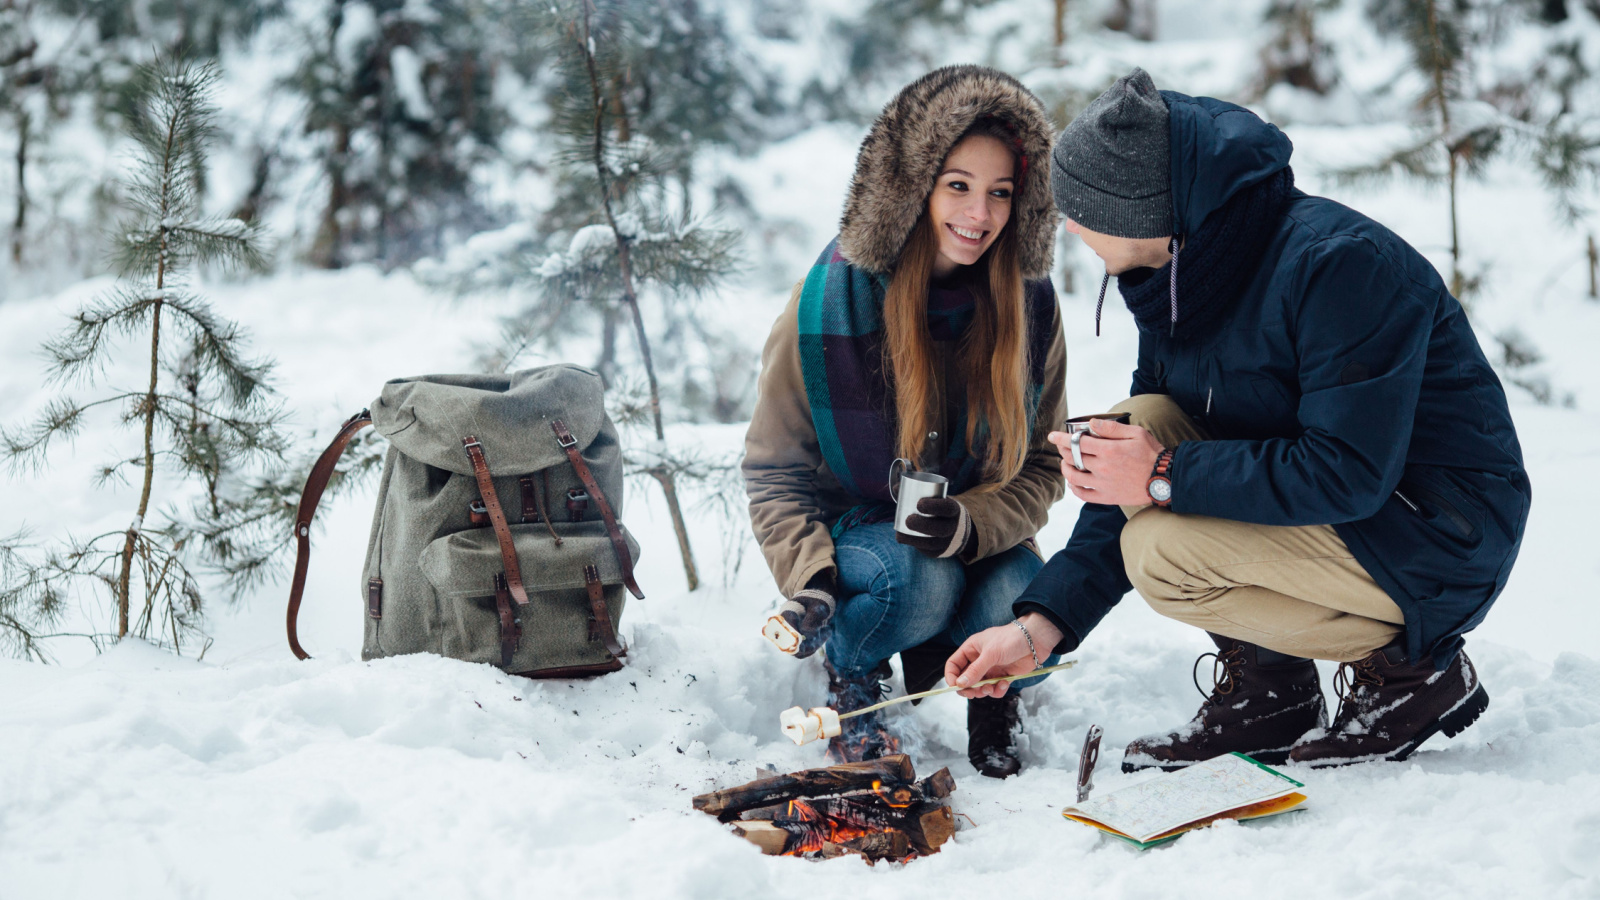 image credit: Maksym Azovtsev/Shutterstock <p><span>For the adventurous, winter camping offers a unique way to connect with nature. The quiet and solitude of a winter forest are unmatched. This activity requires careful planning and the right gear, but the reward is a truly unique experience. Enjoy the stillness of the night and the beauty of waking up to a snowy wonderland.</span></p>